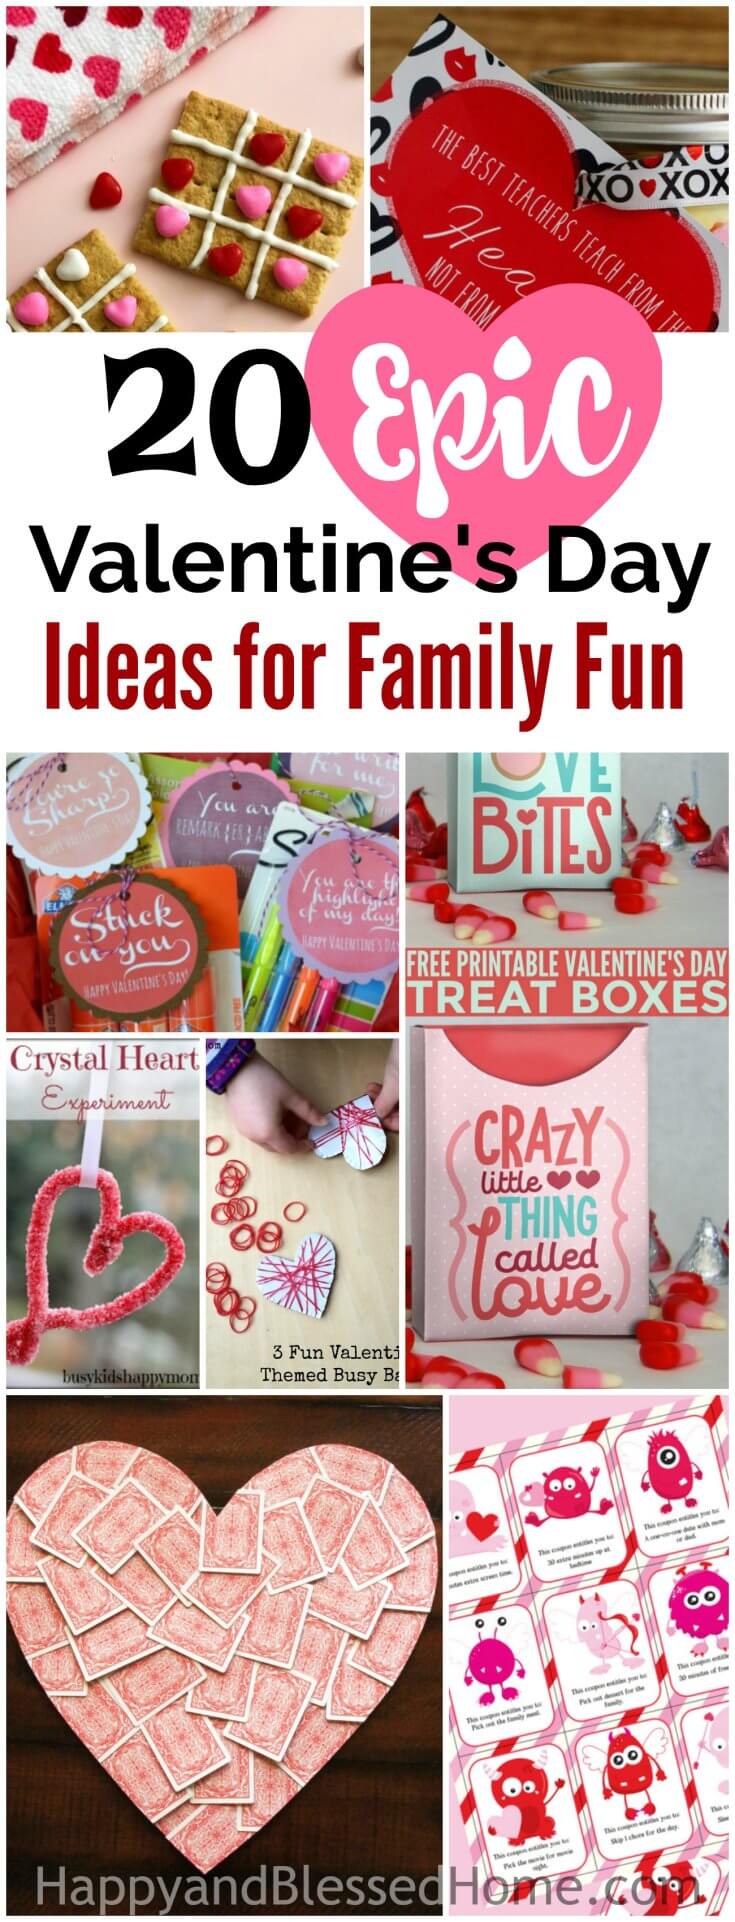 20 Epic Valentine's Day Ideas for Family Fun